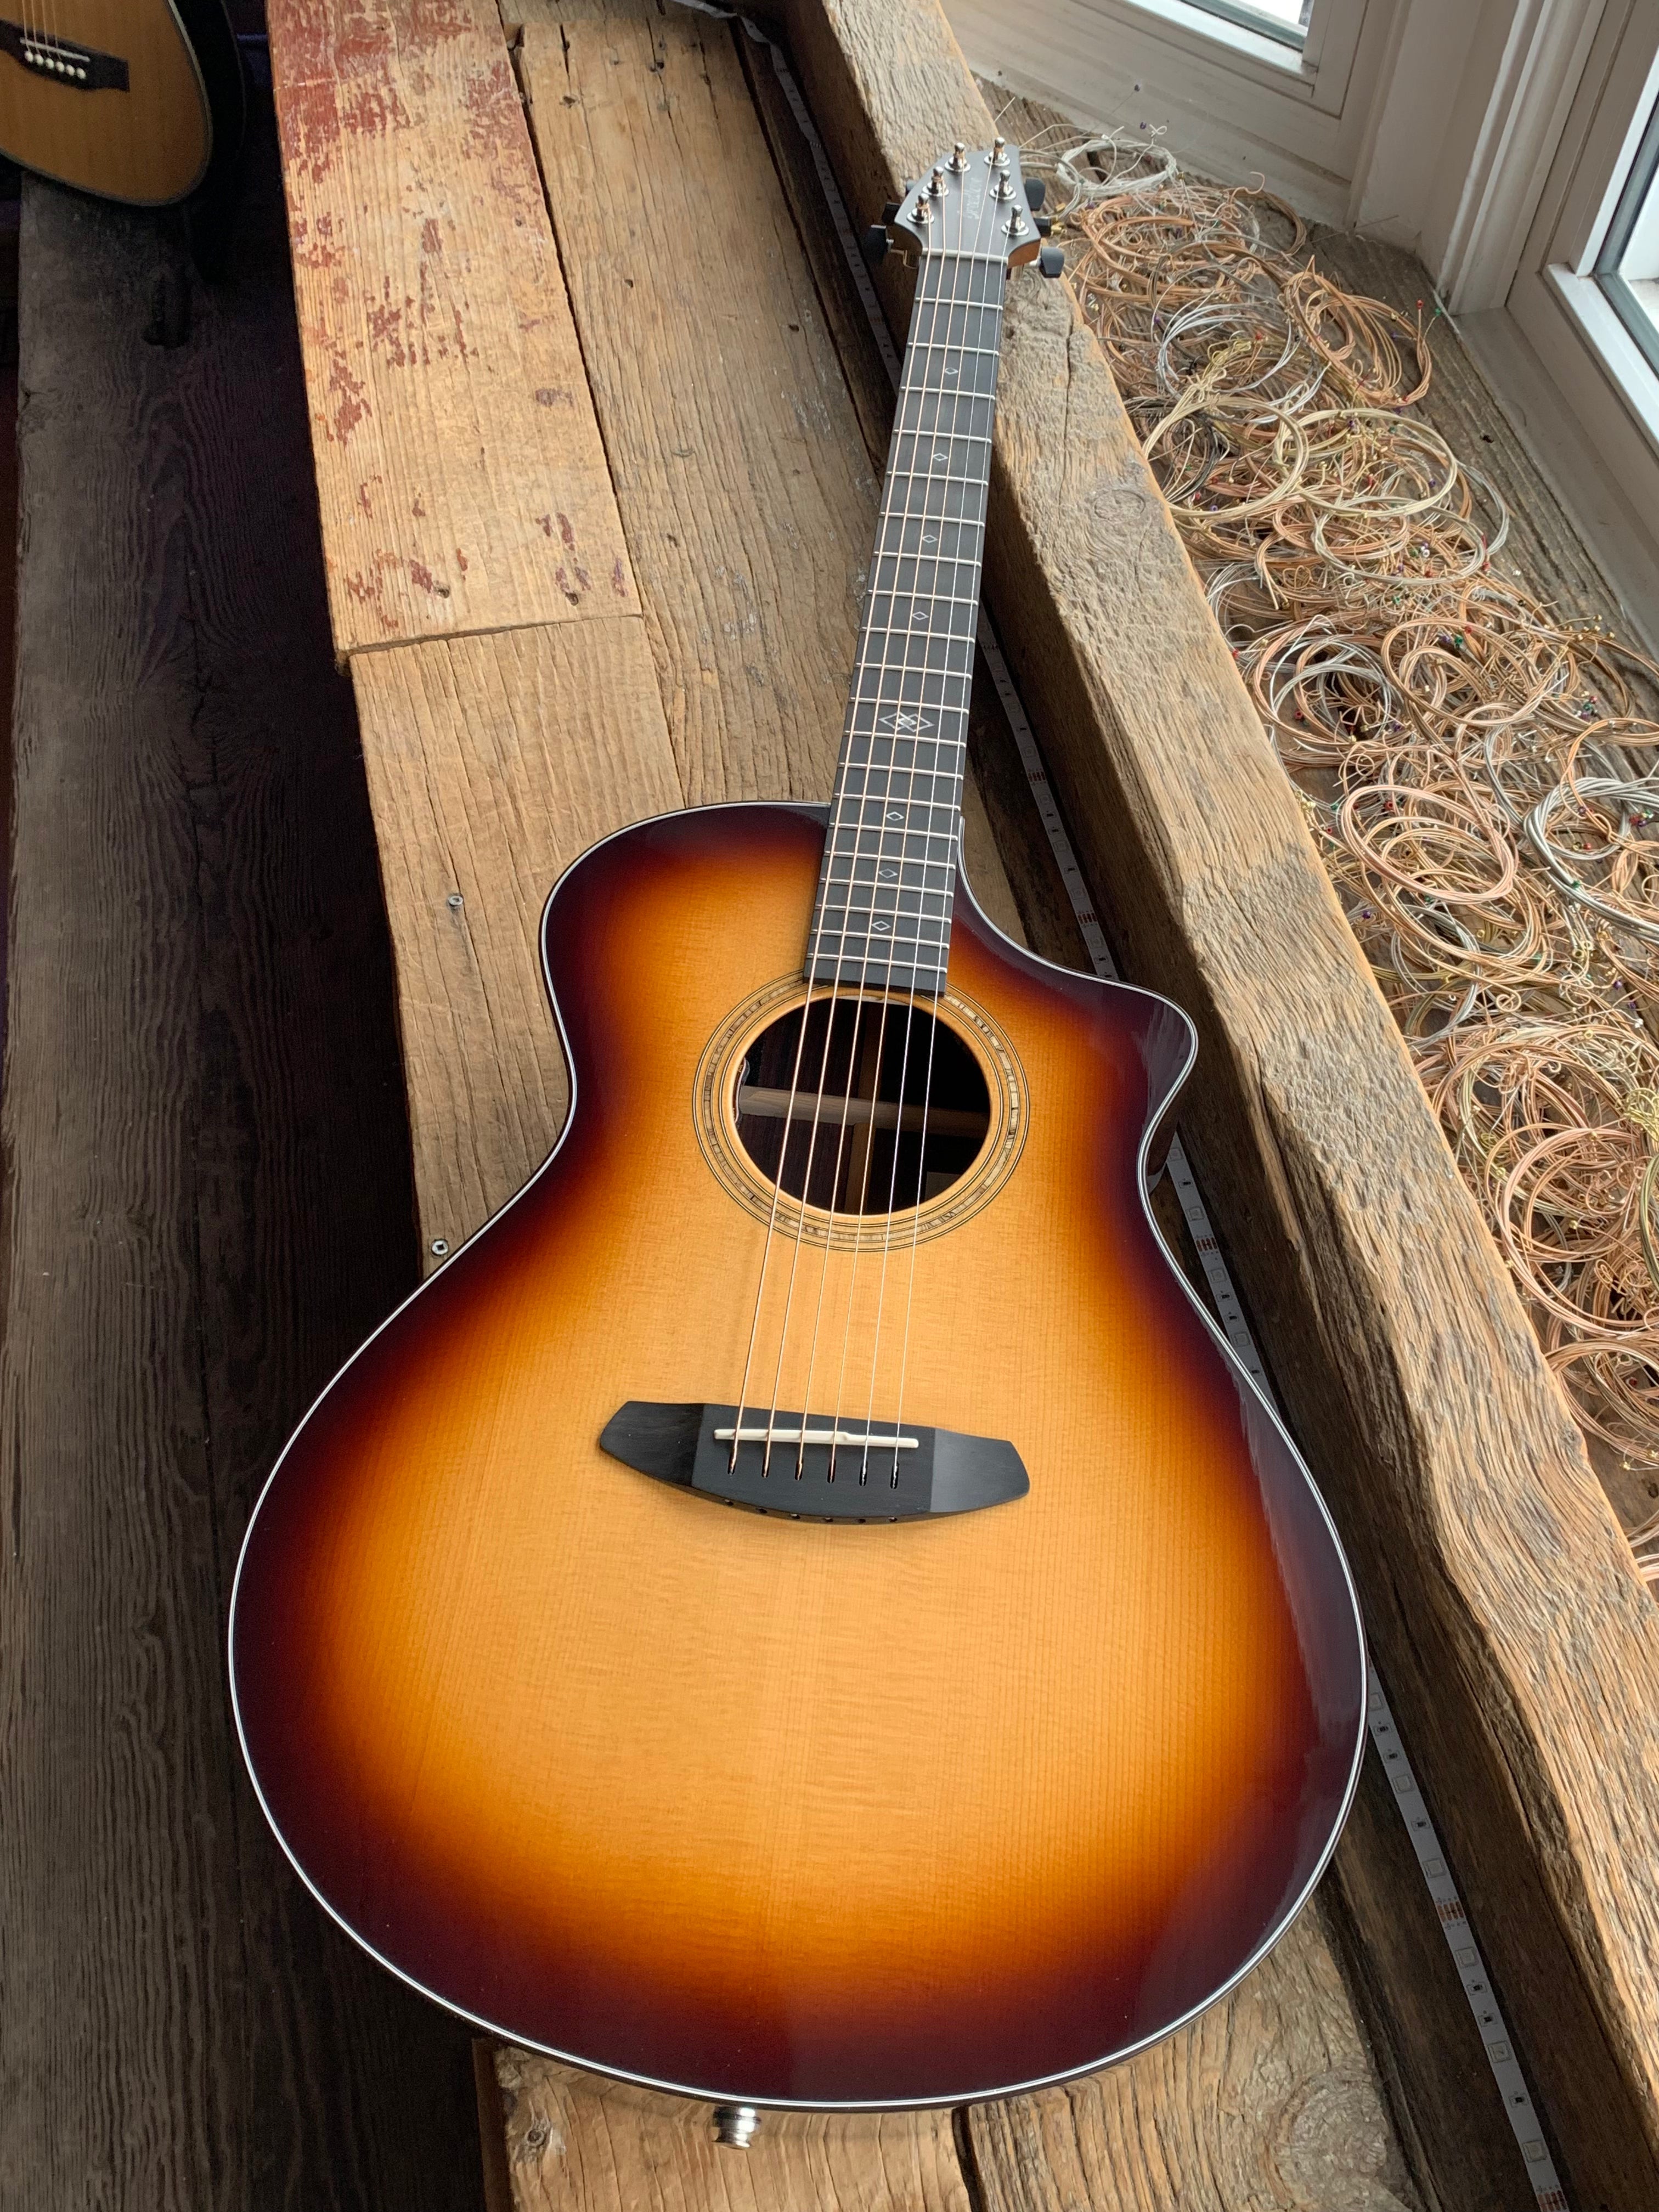 The Concert Thinline Acoustic Guitar Body Shape: Breedlove's Other